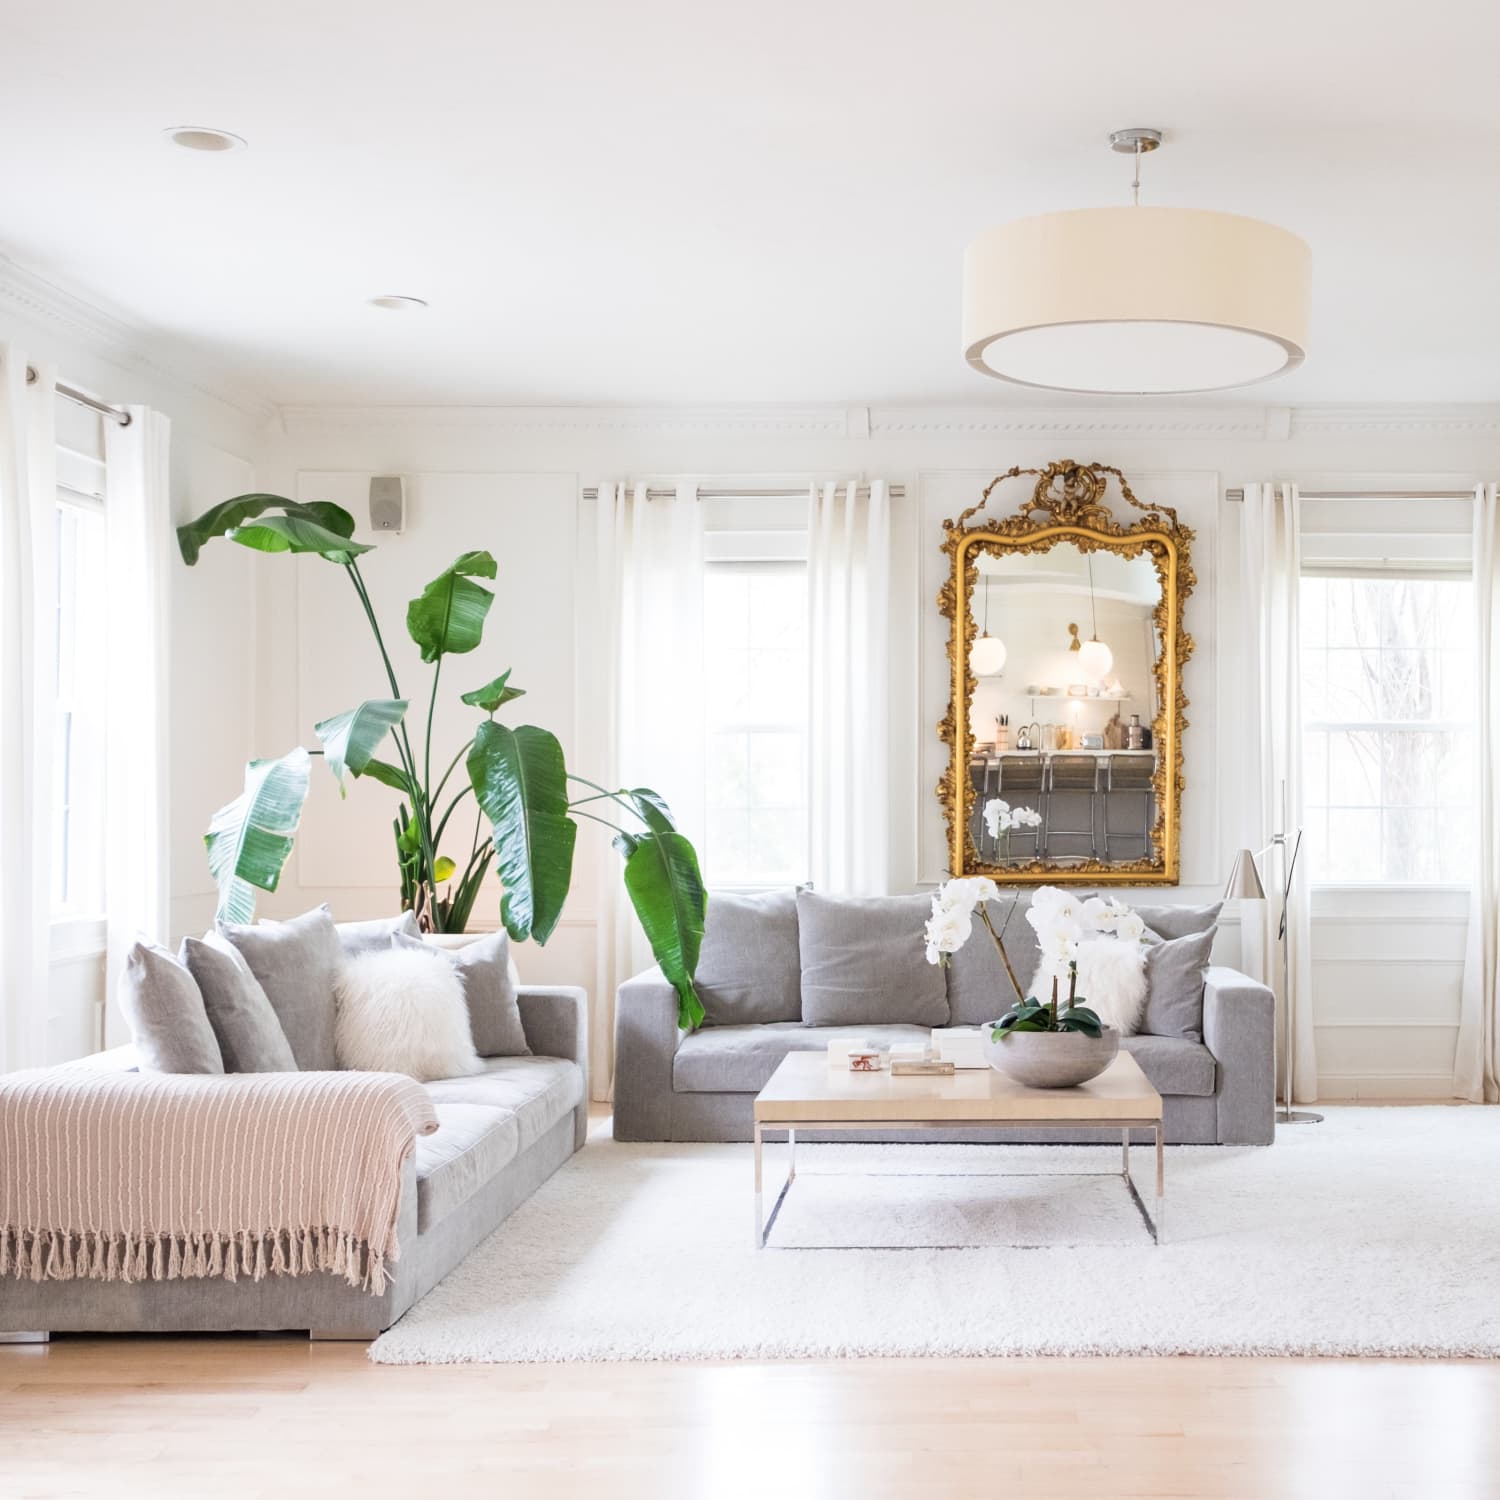 9 Stunning Off-White Paint Colors Our Designers Love and Why